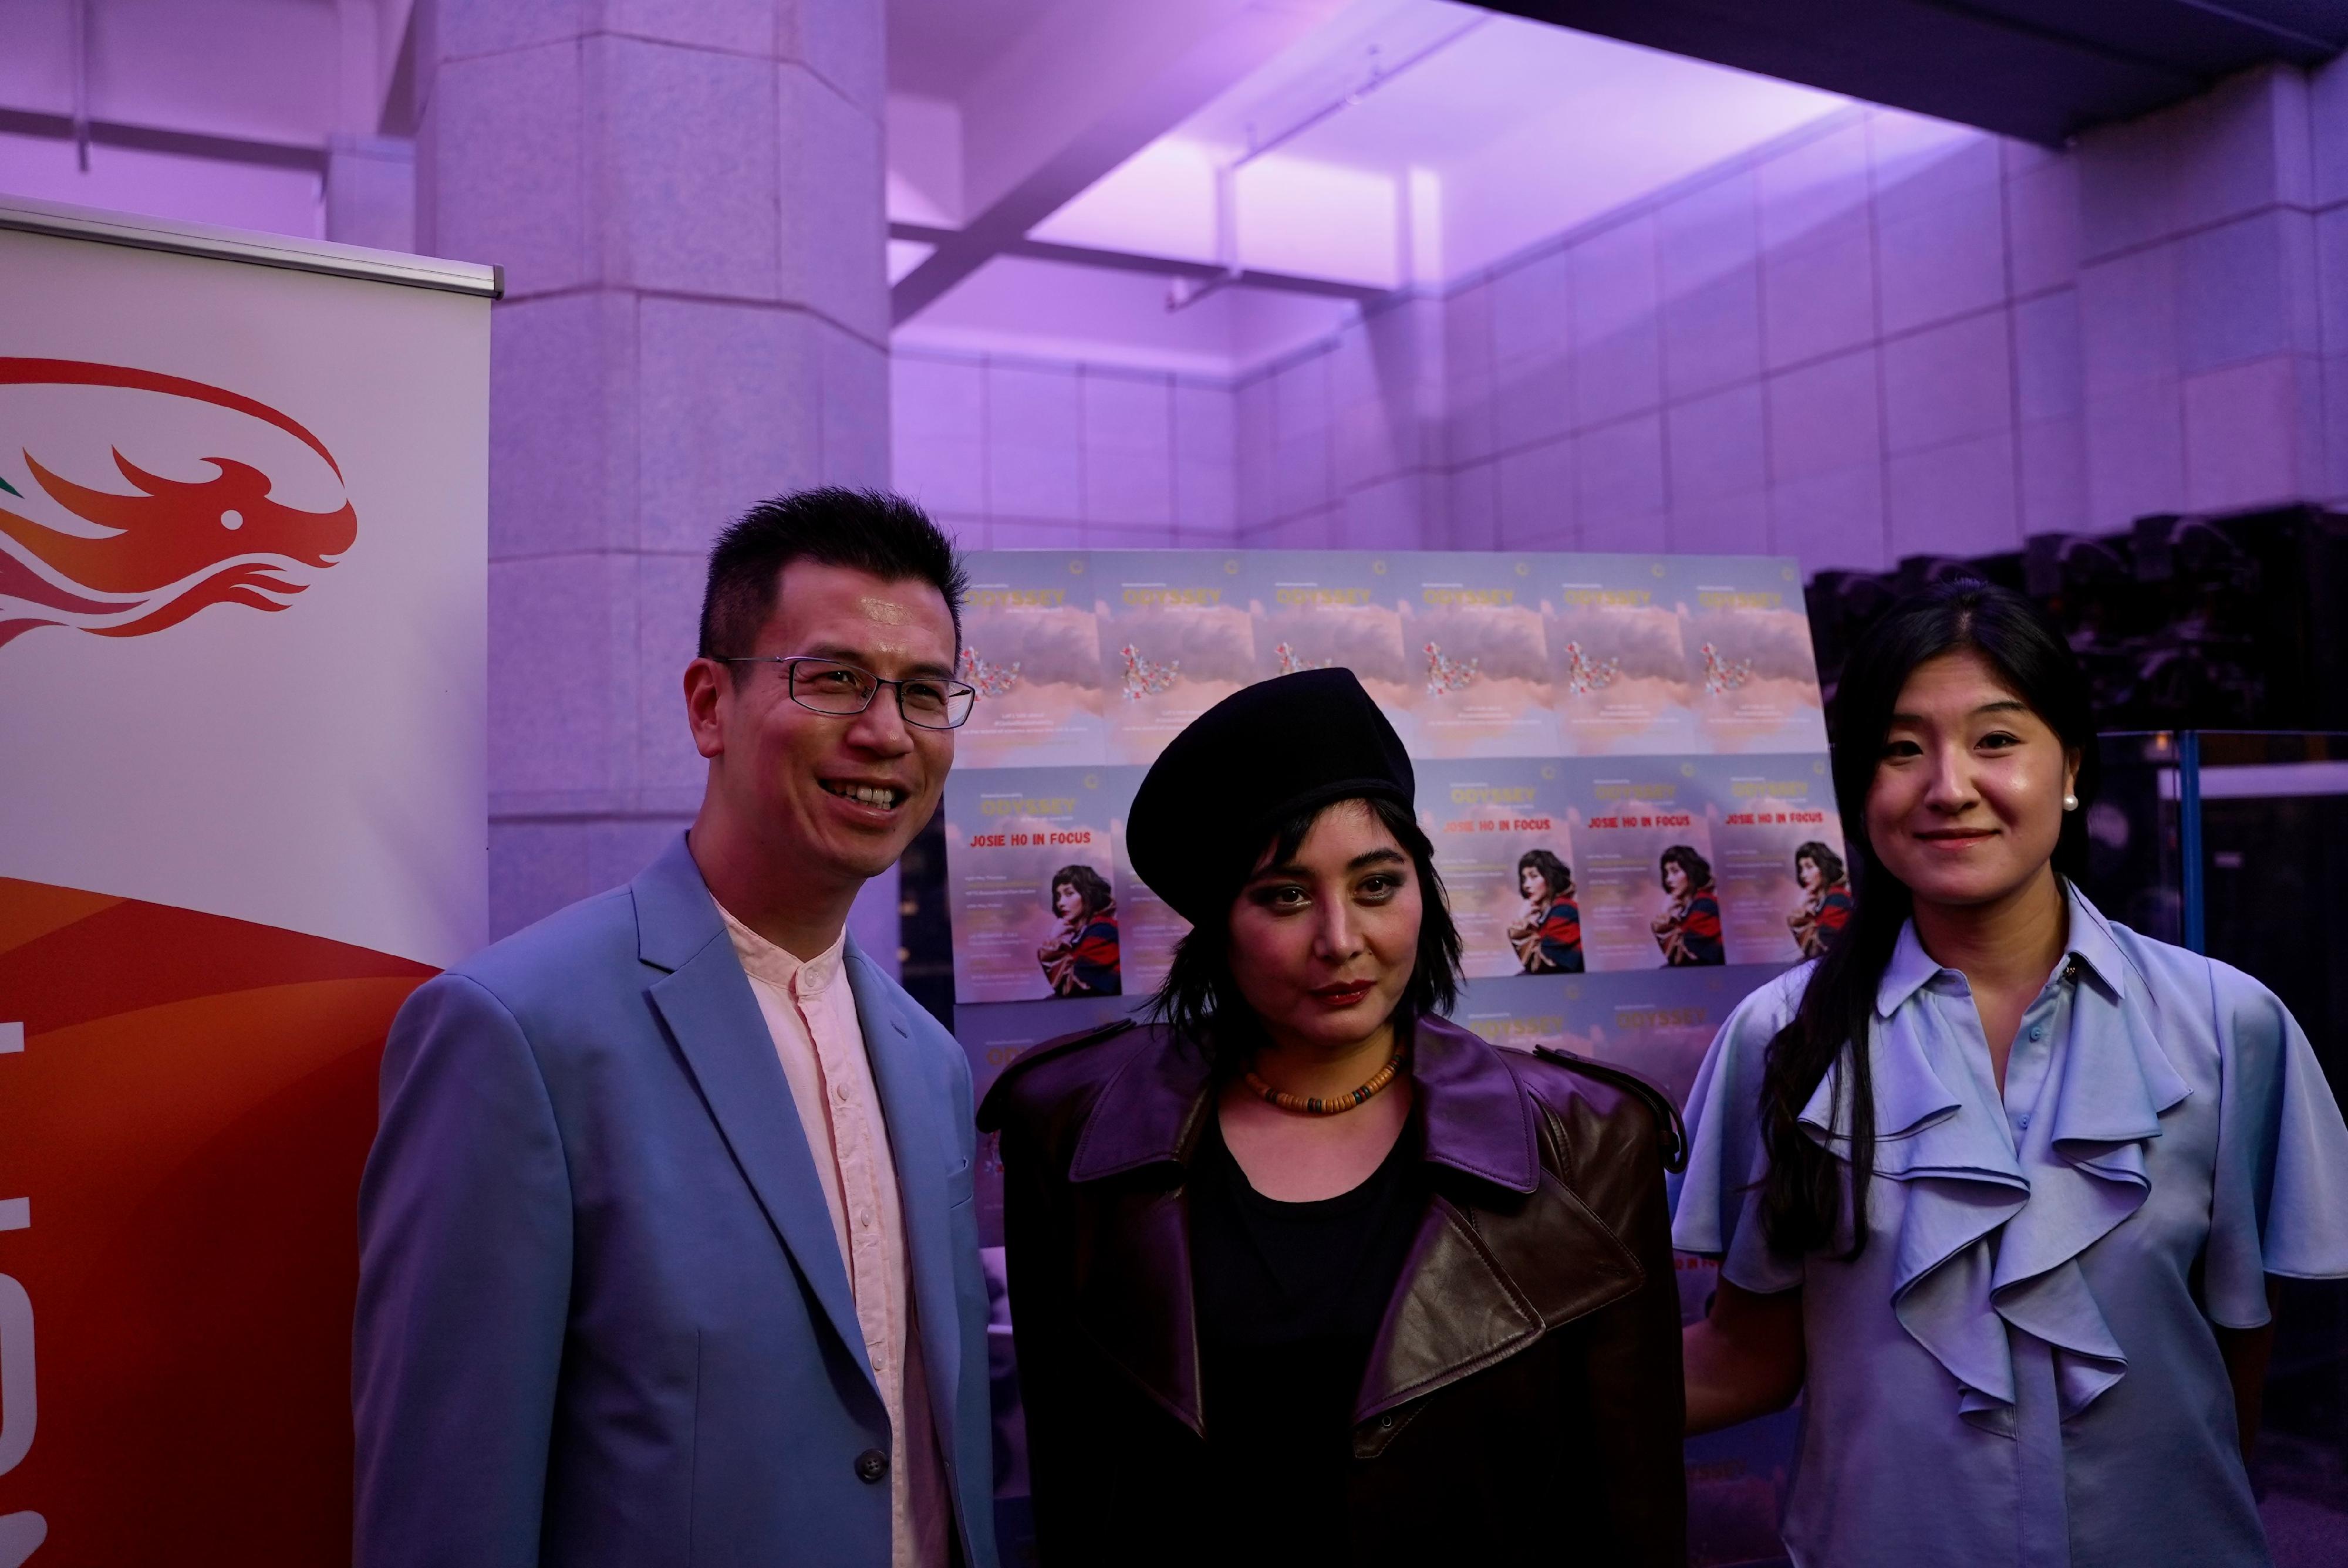 The Hong Kong Economic and Trade Office, London (London ETO) and Create Hong Kong supported the opening screening and reception of Odyssey 2023 film festival held at the Battersea Power Station, London on May 26 (London time). Photo shows the Director-General of the London ETO, Mr Gilford Law (left); leading actress of "Finding Bliss: Fire and Ice - The Director's Cut" Josie Ho (centre); and the Founder and Executive Director of UK-China Film Collab, Dr Chan Hiu-man (right), at the opening screening reception.